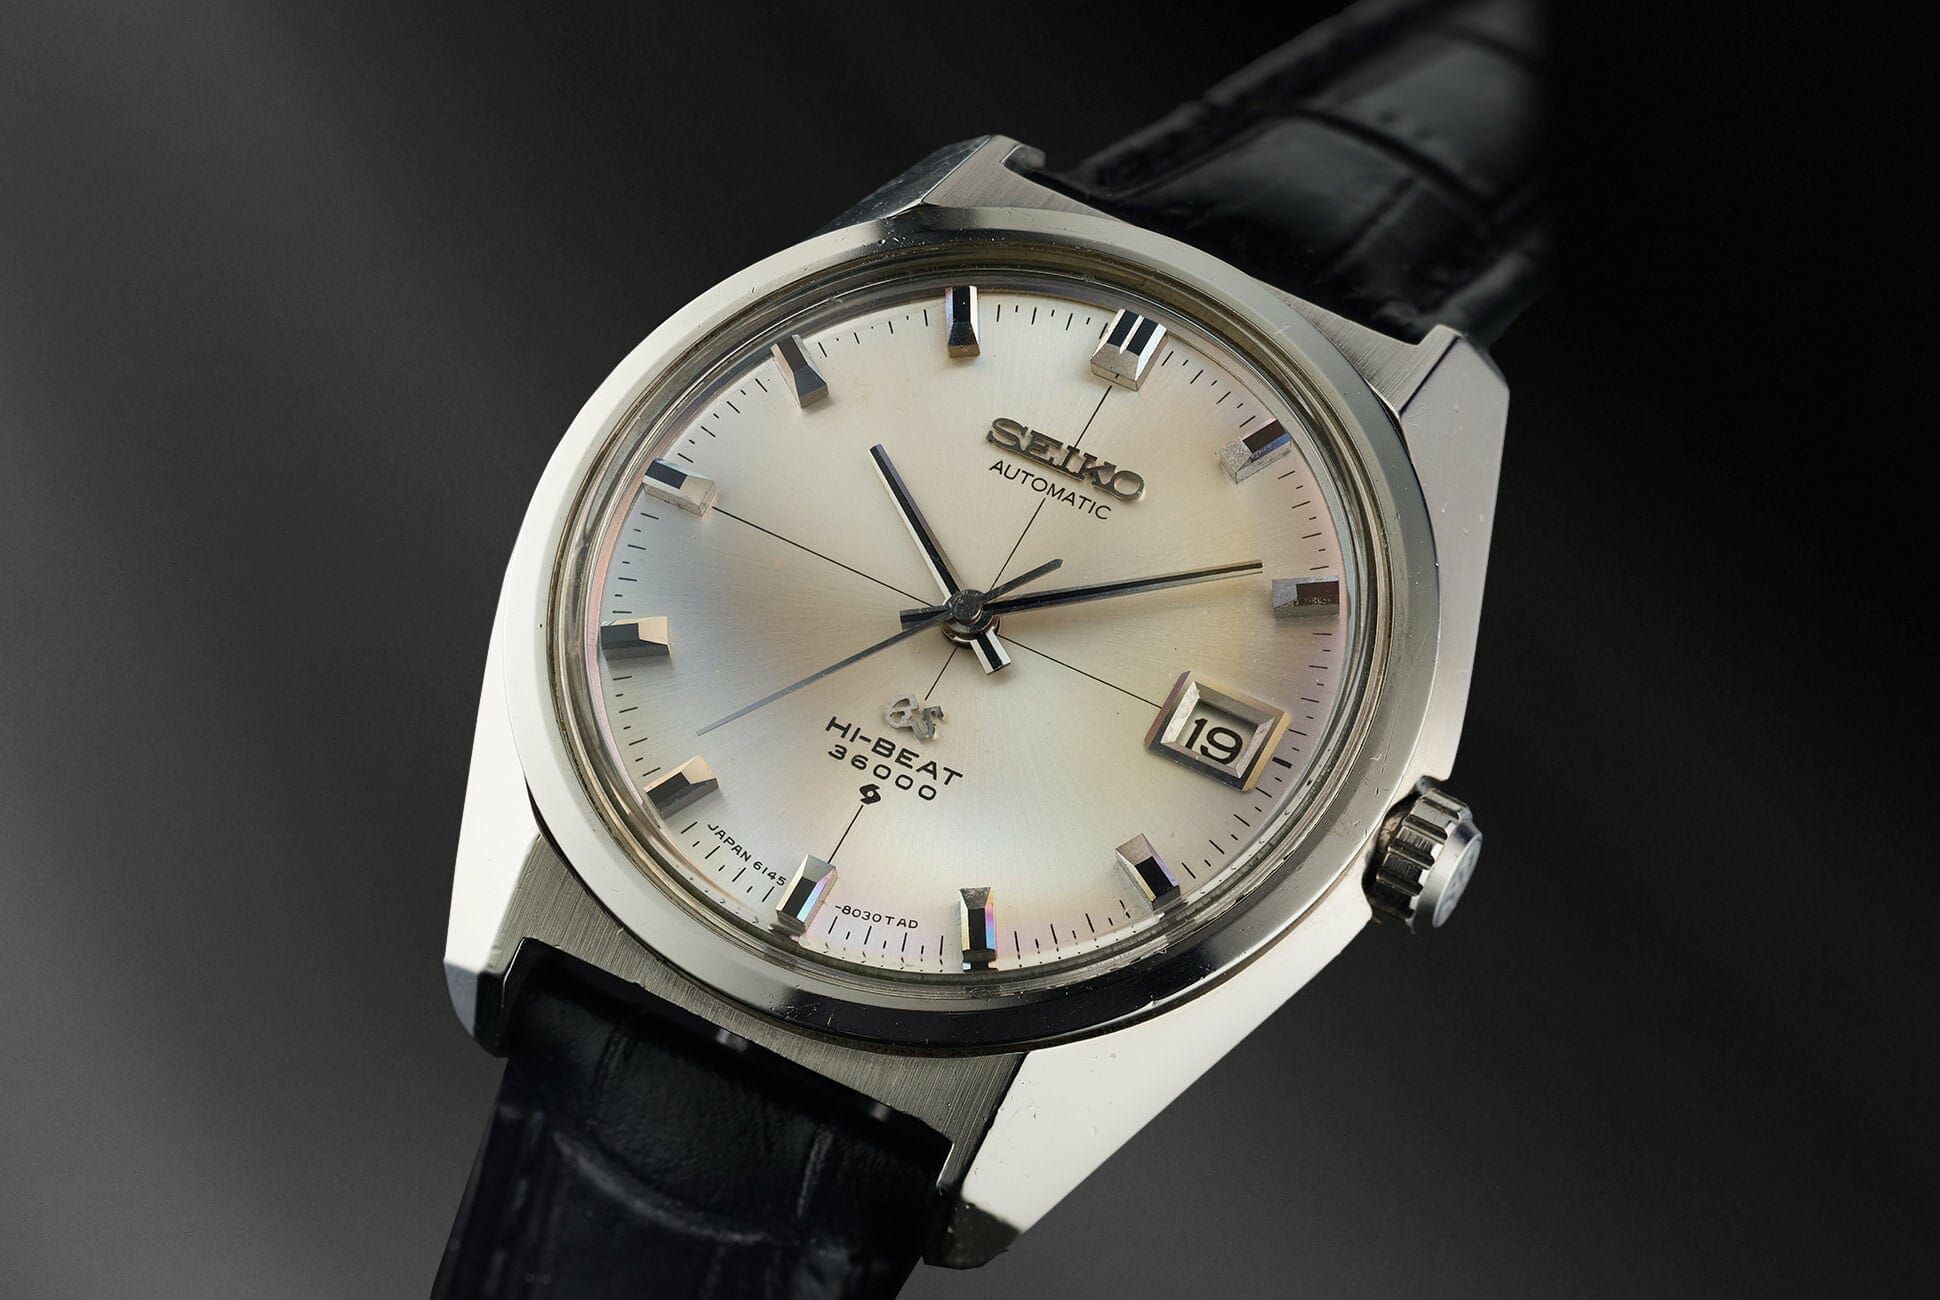 Today Is Your Best Chance to Save on a Vintage Grand Seiko Watch